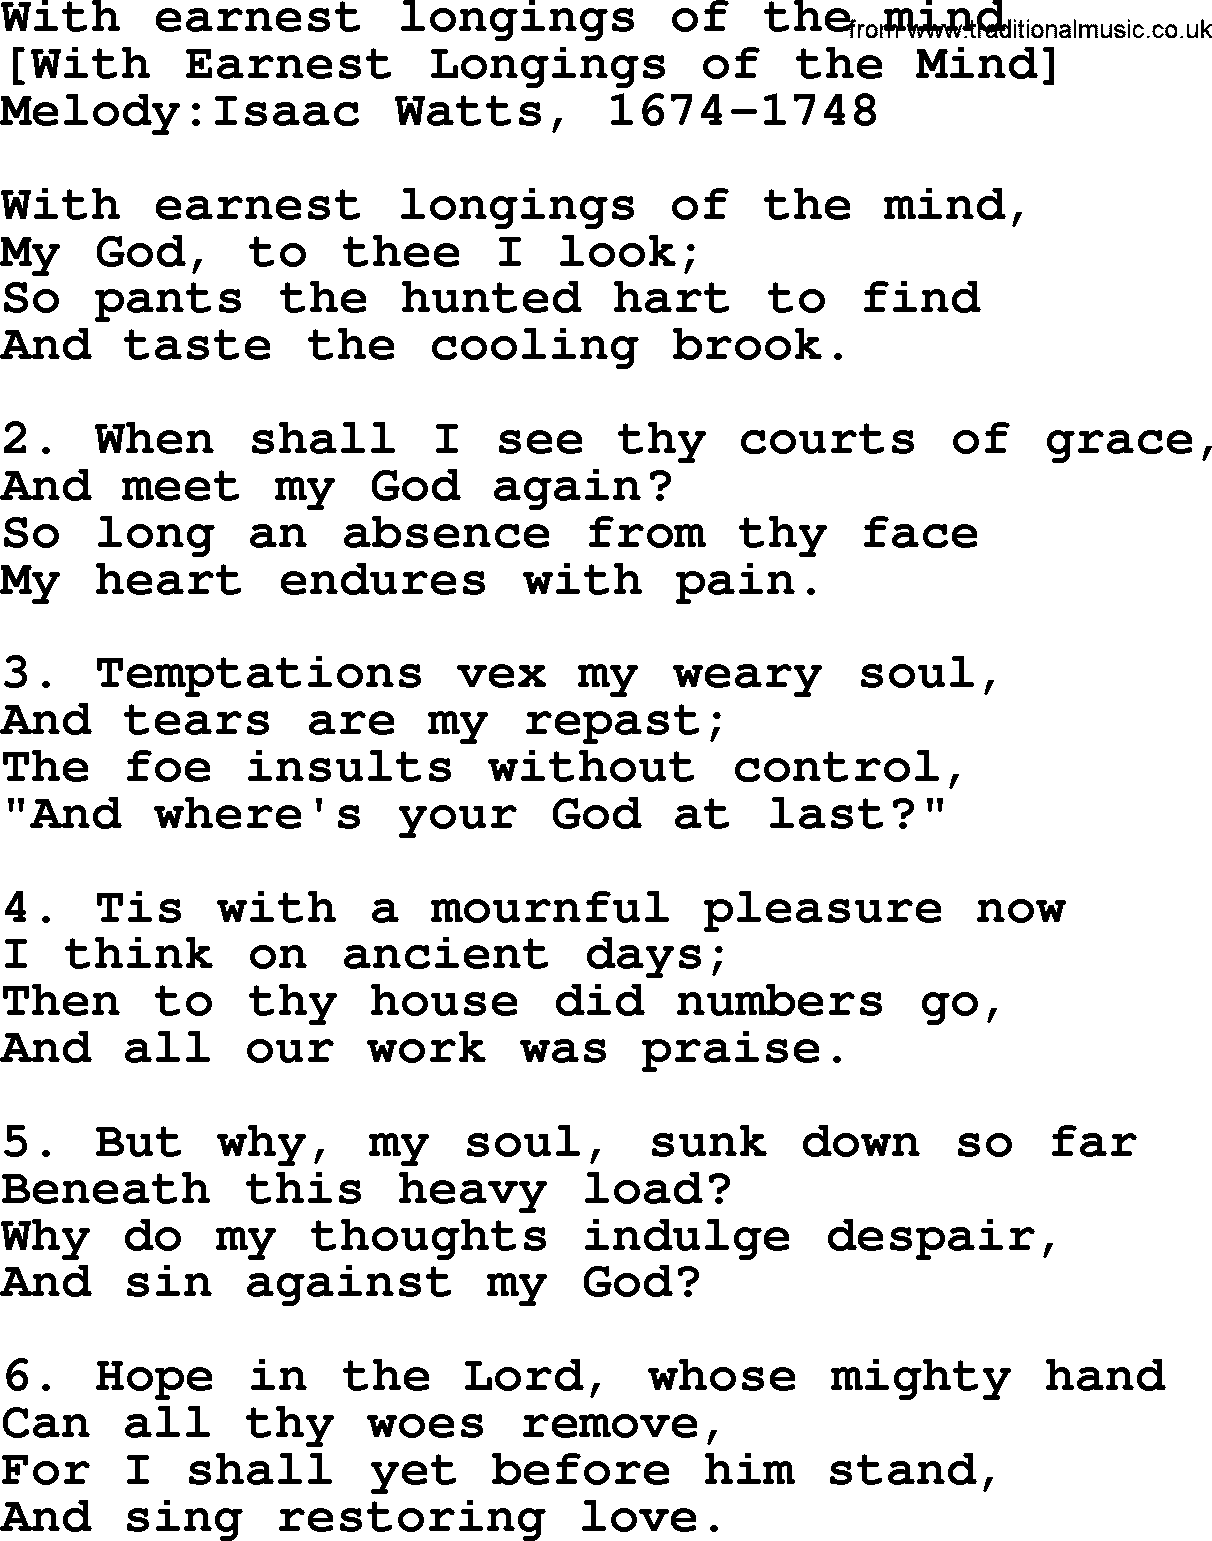 Old English Song: With Earnest Longings Of The Mind lyrics